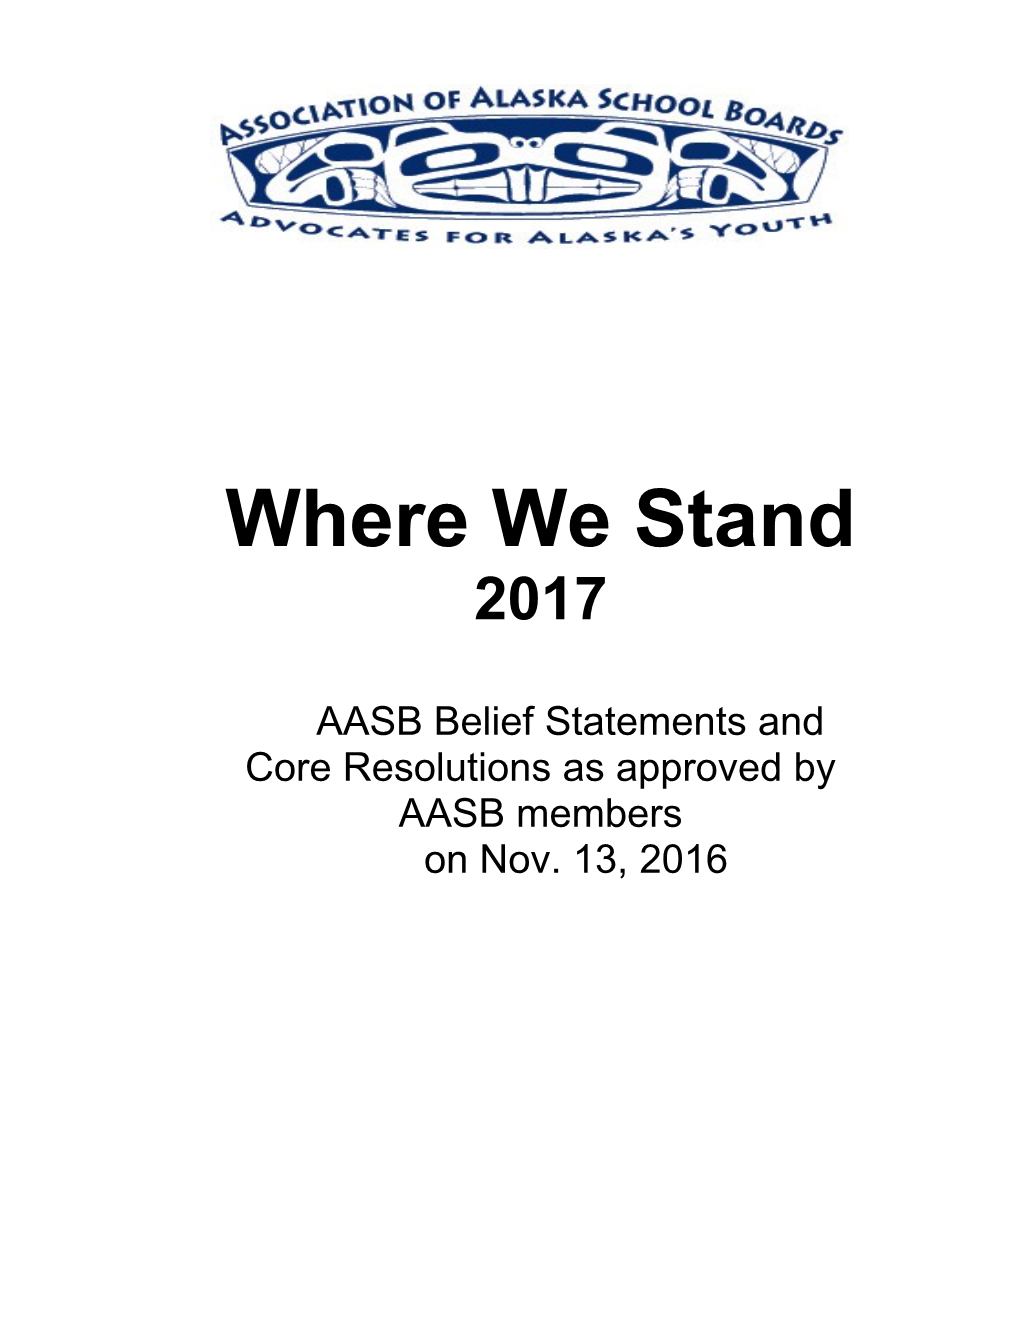 AASB Belief Statements and Core Resolutions As Approved by AASB Members